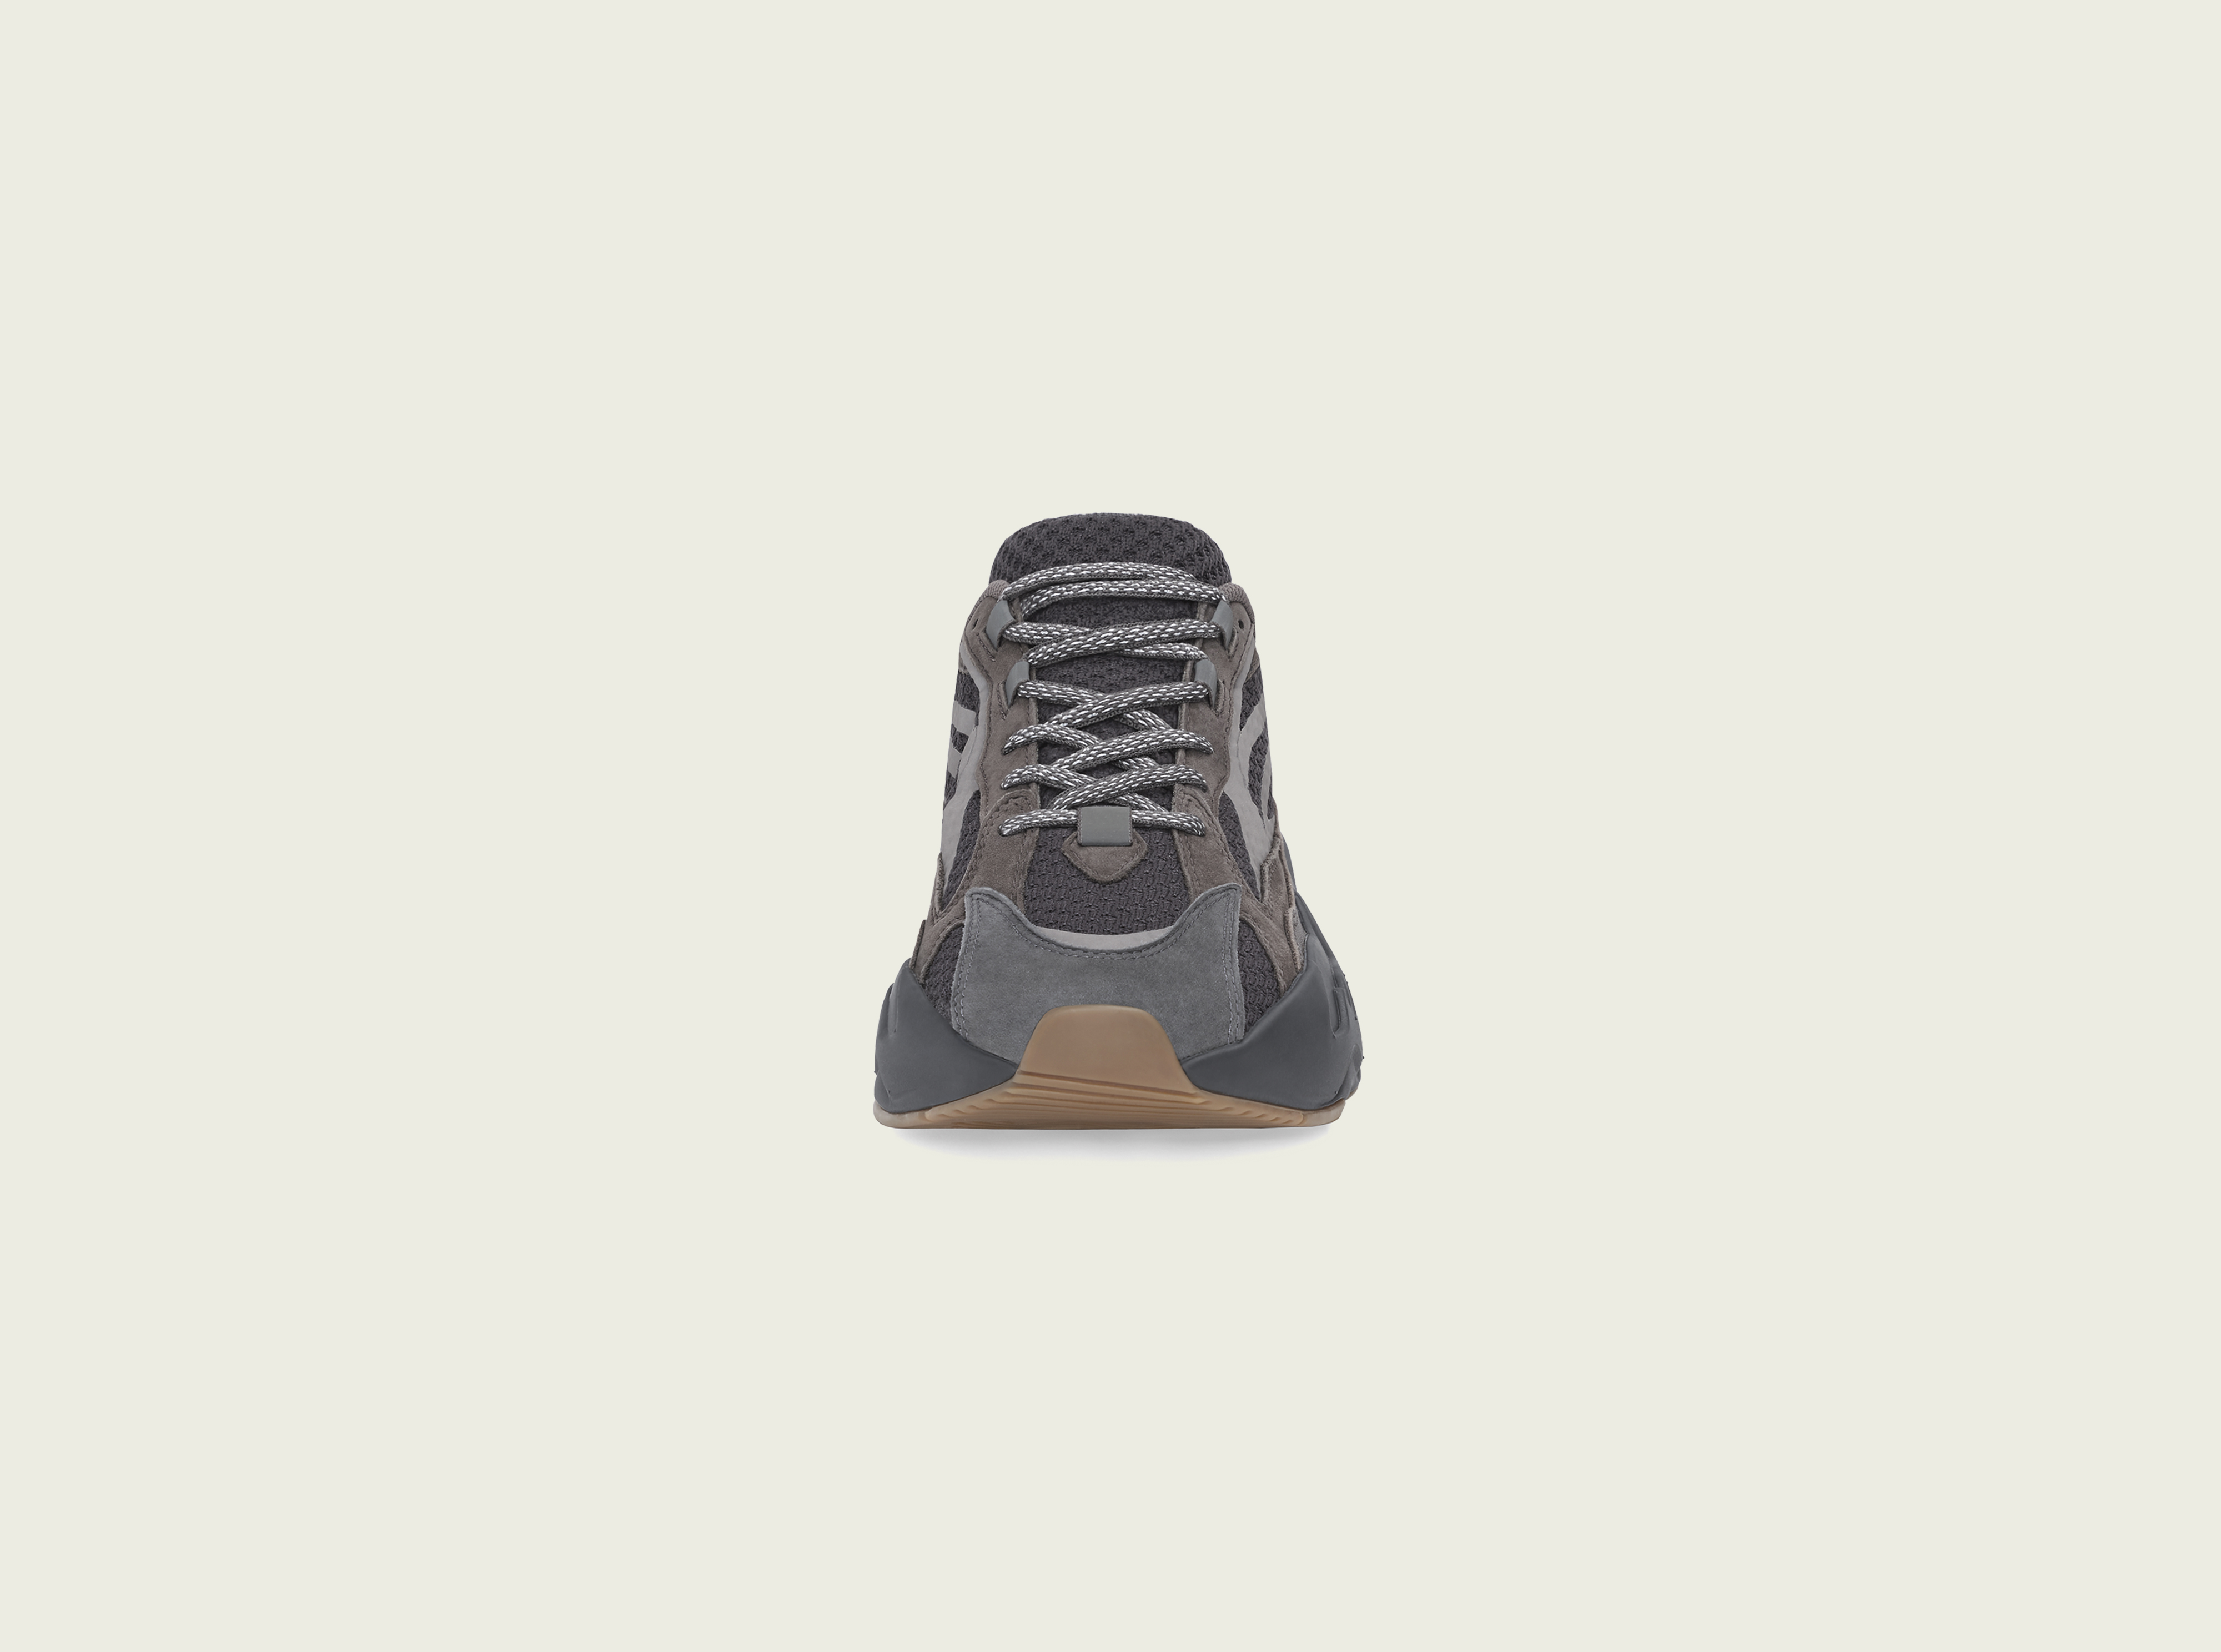 yeezy march 23